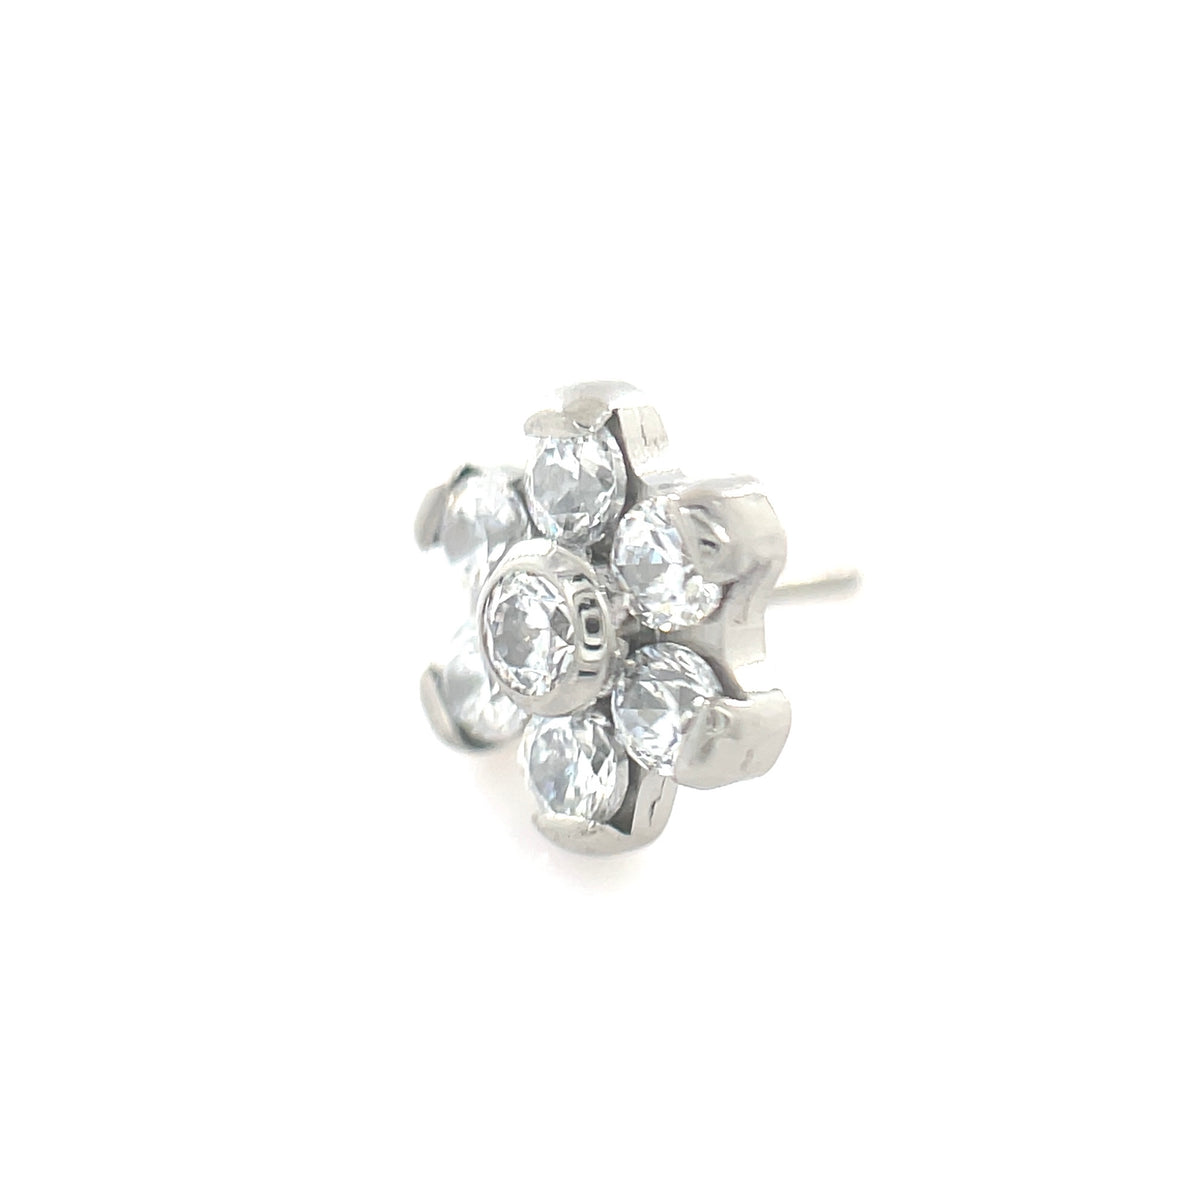 Industrial Strength Titanium &amp; White CZ Flower End with 6 Petals